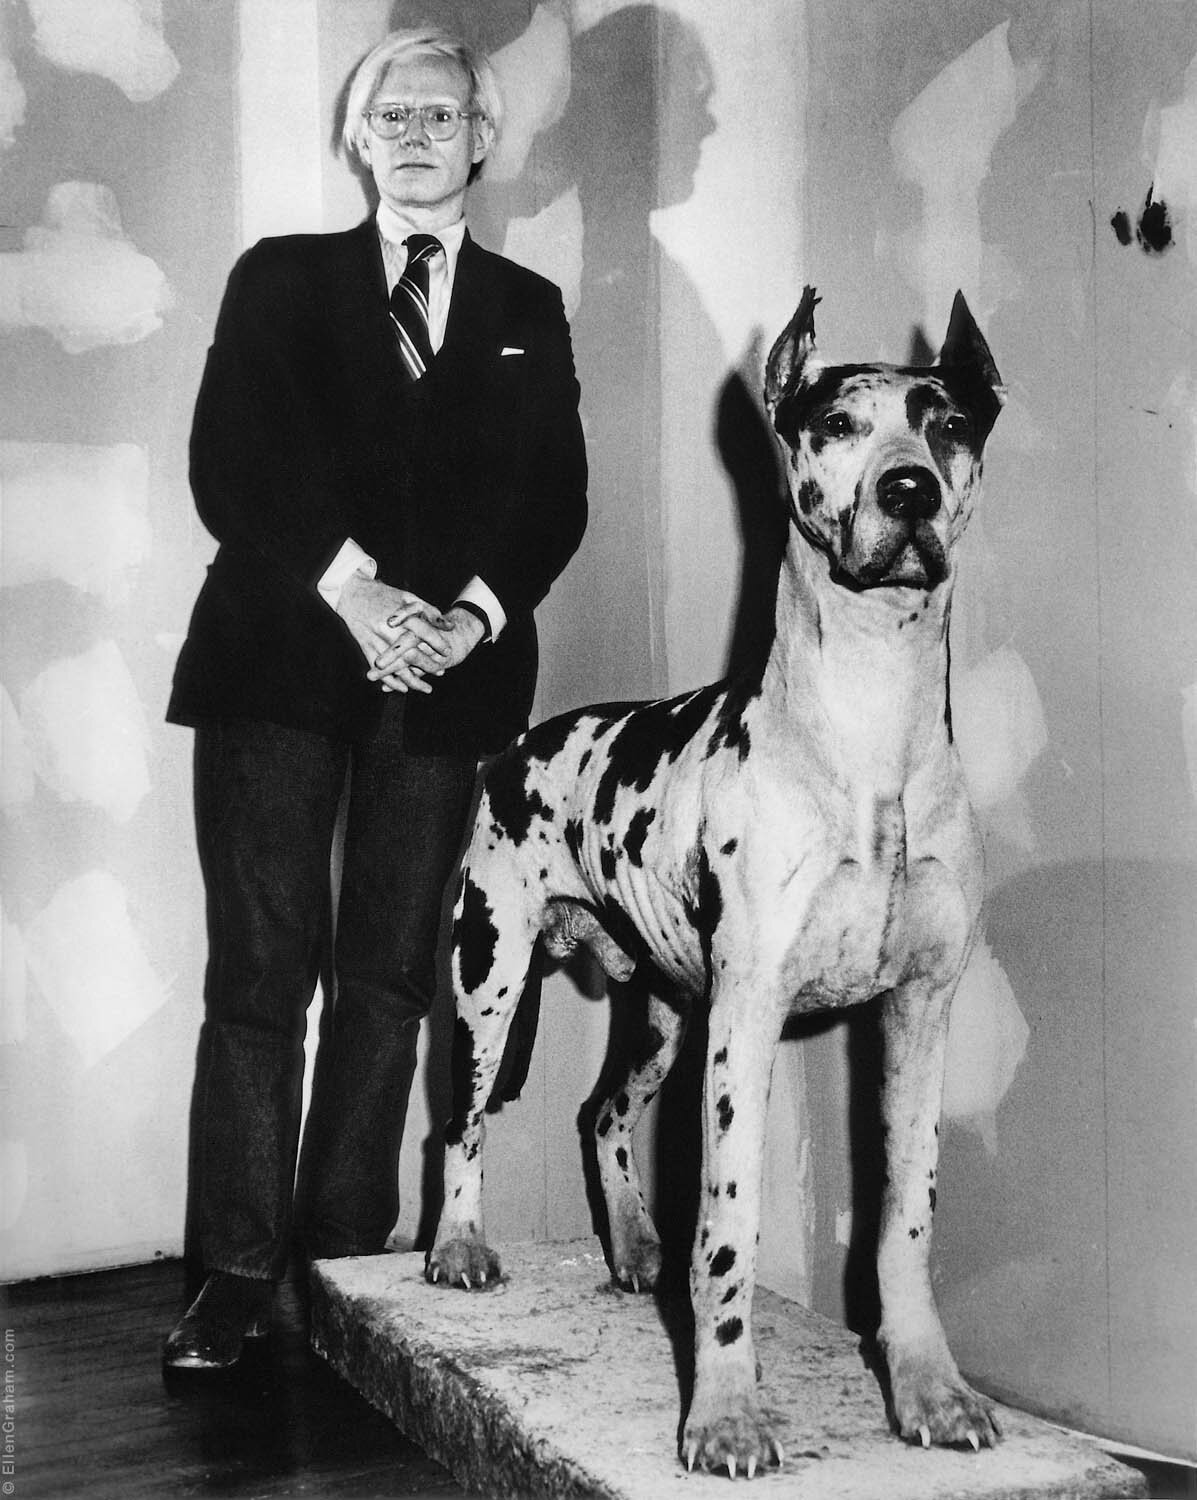 Andy Warhol With Stuffed Dog, The Factory, New York, NY, 1974